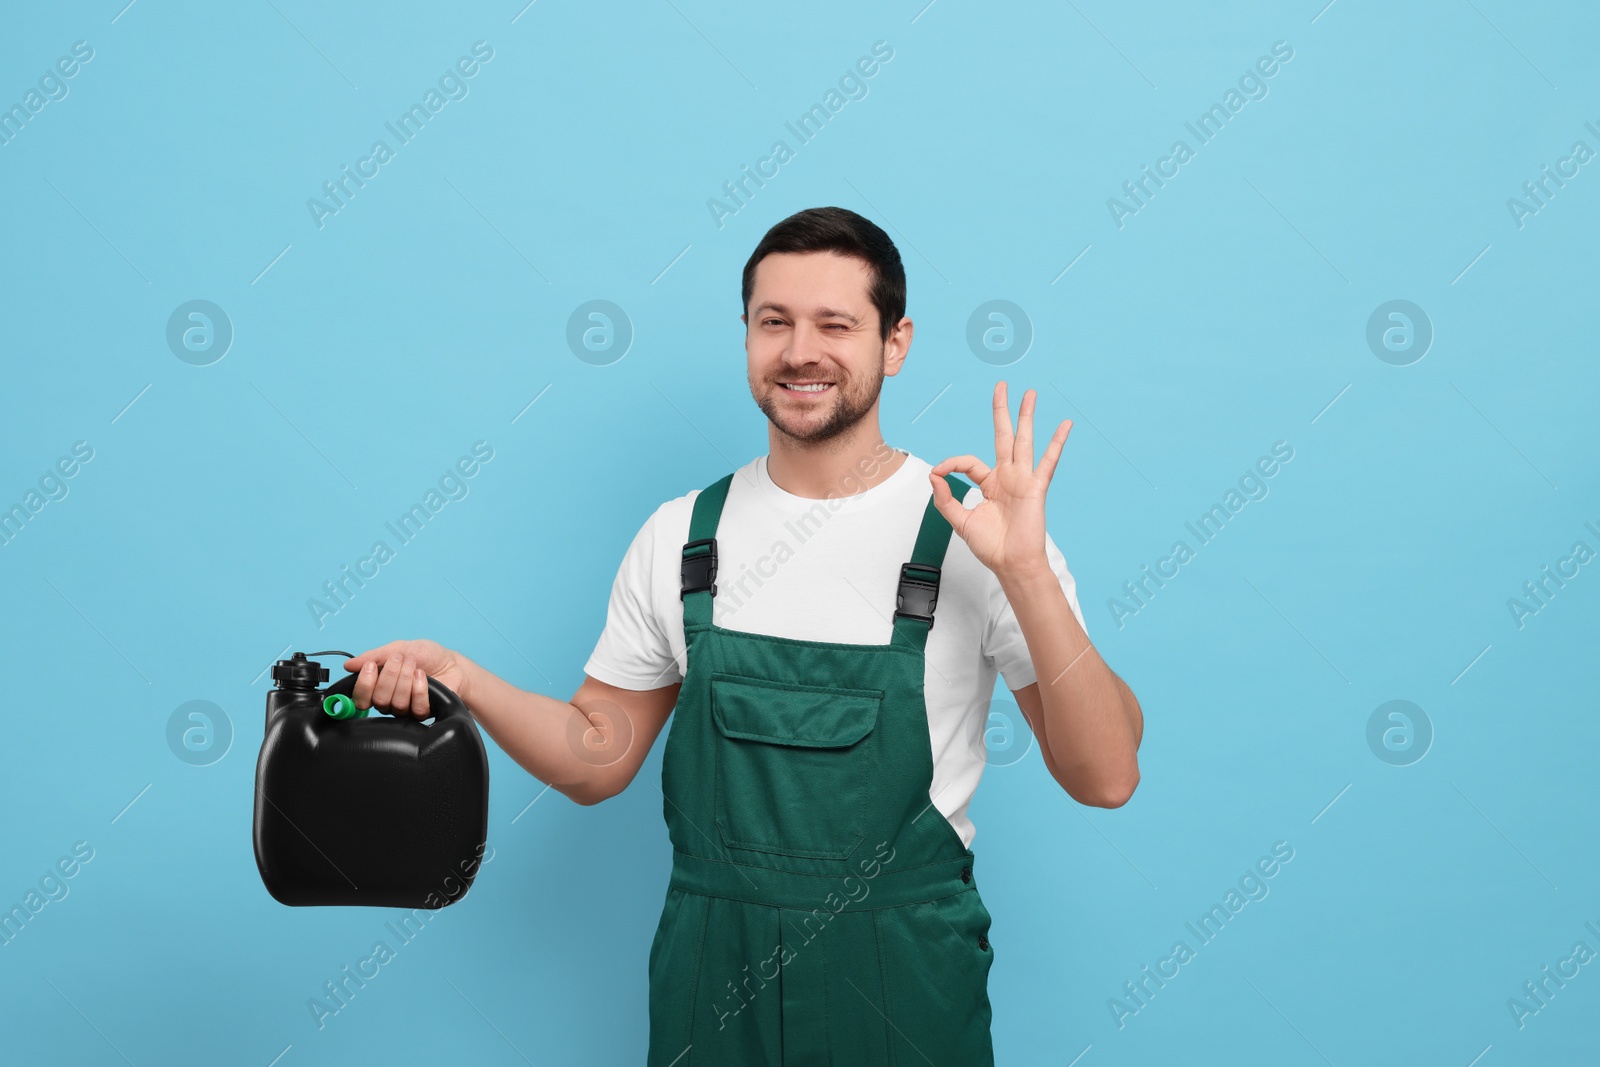 Photo of Man holding black canister and showing OK gesture on light blue background